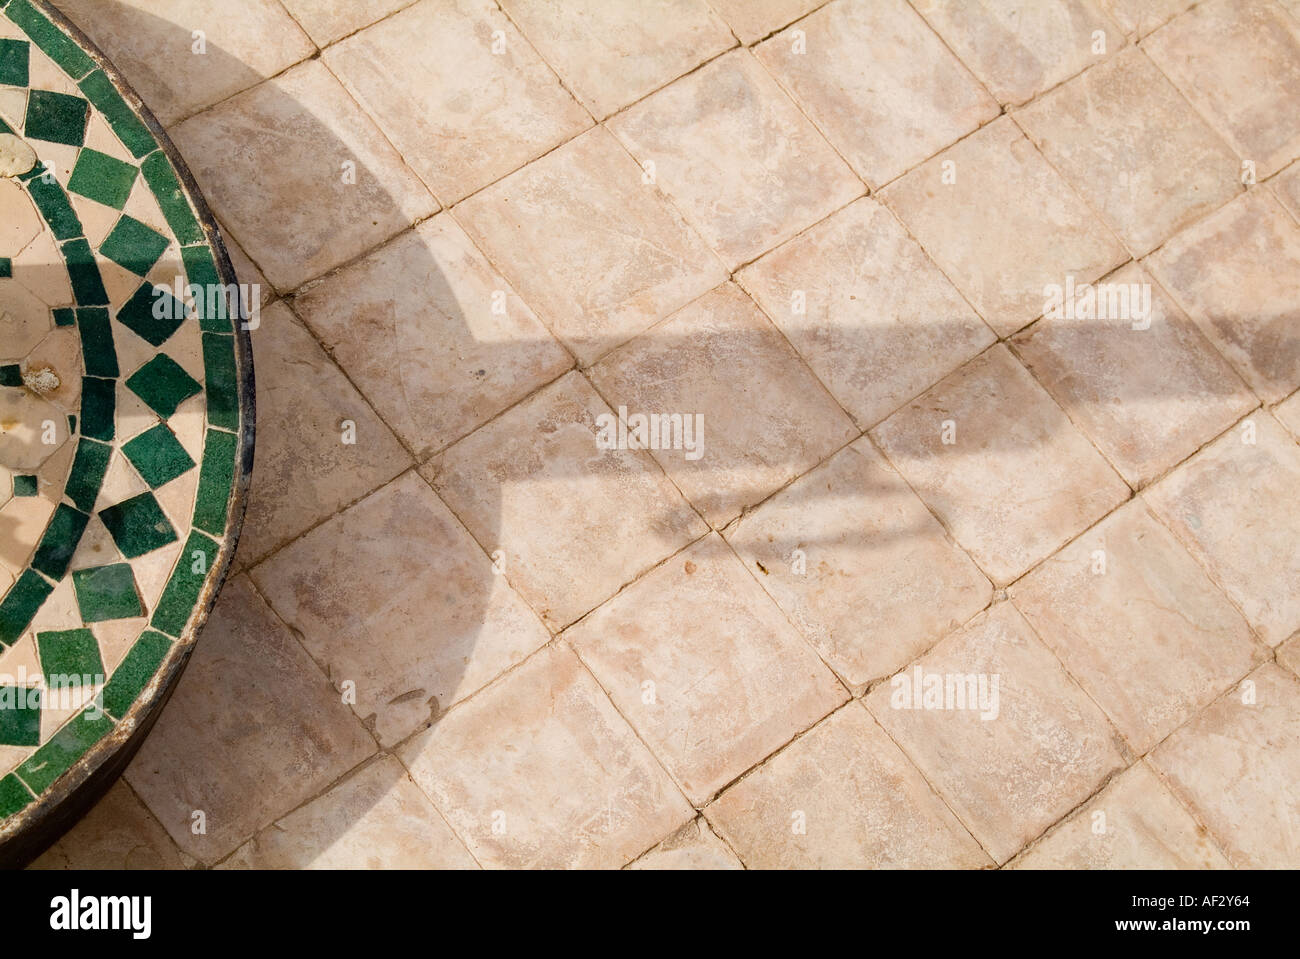 Luxury villa, Marrakesh, Morocco, close of up abstract photograph of ceramic tiles on patio Stock Photo